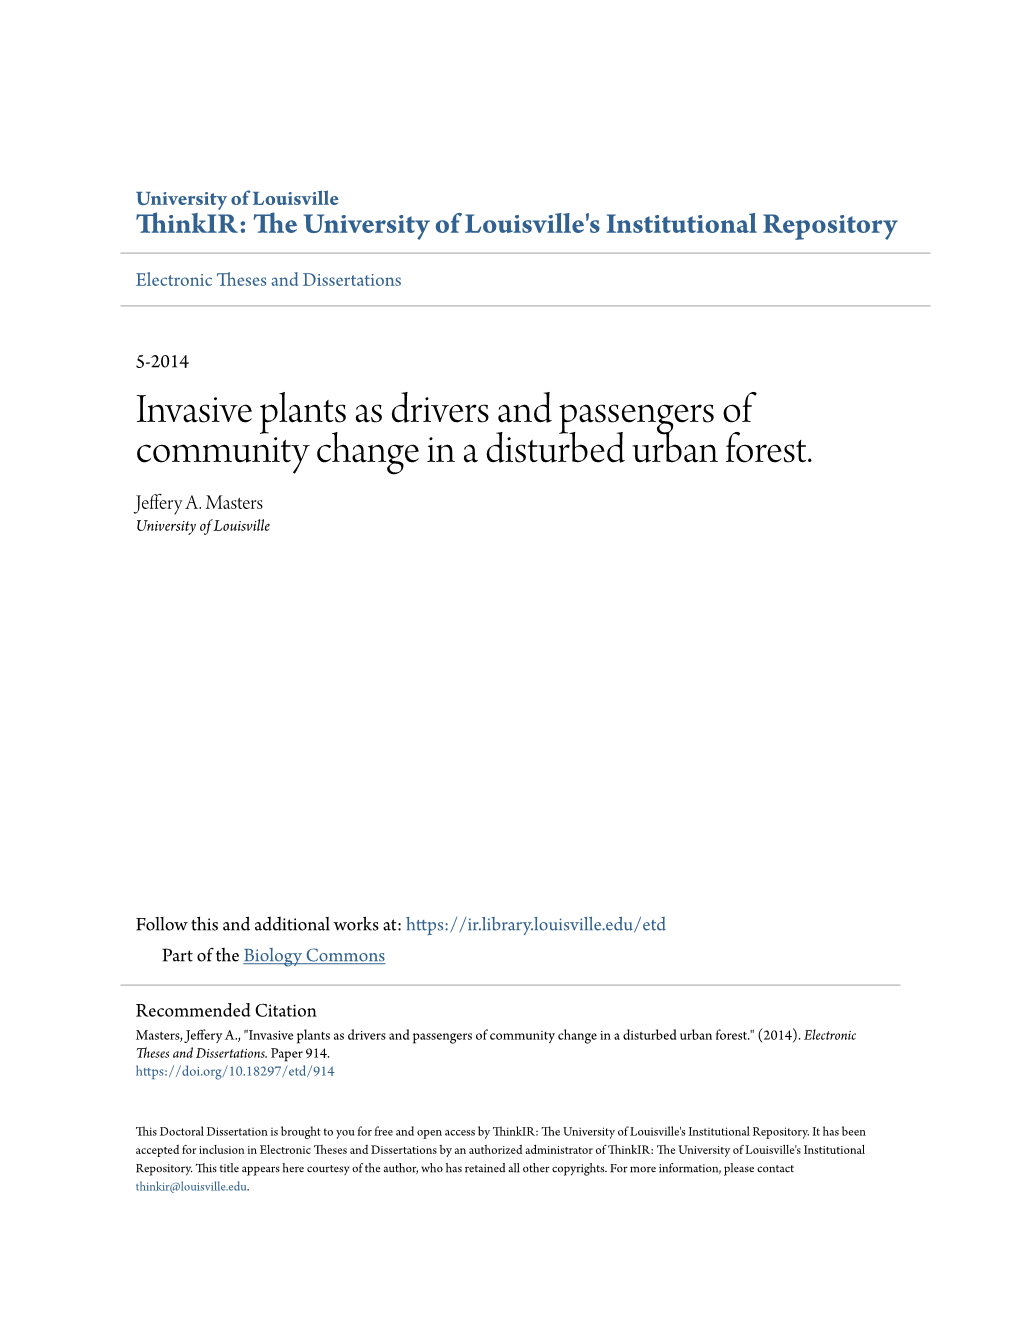 Invasive Plants As Drivers and Passengers of Community Change in a Disturbed Urban Forest